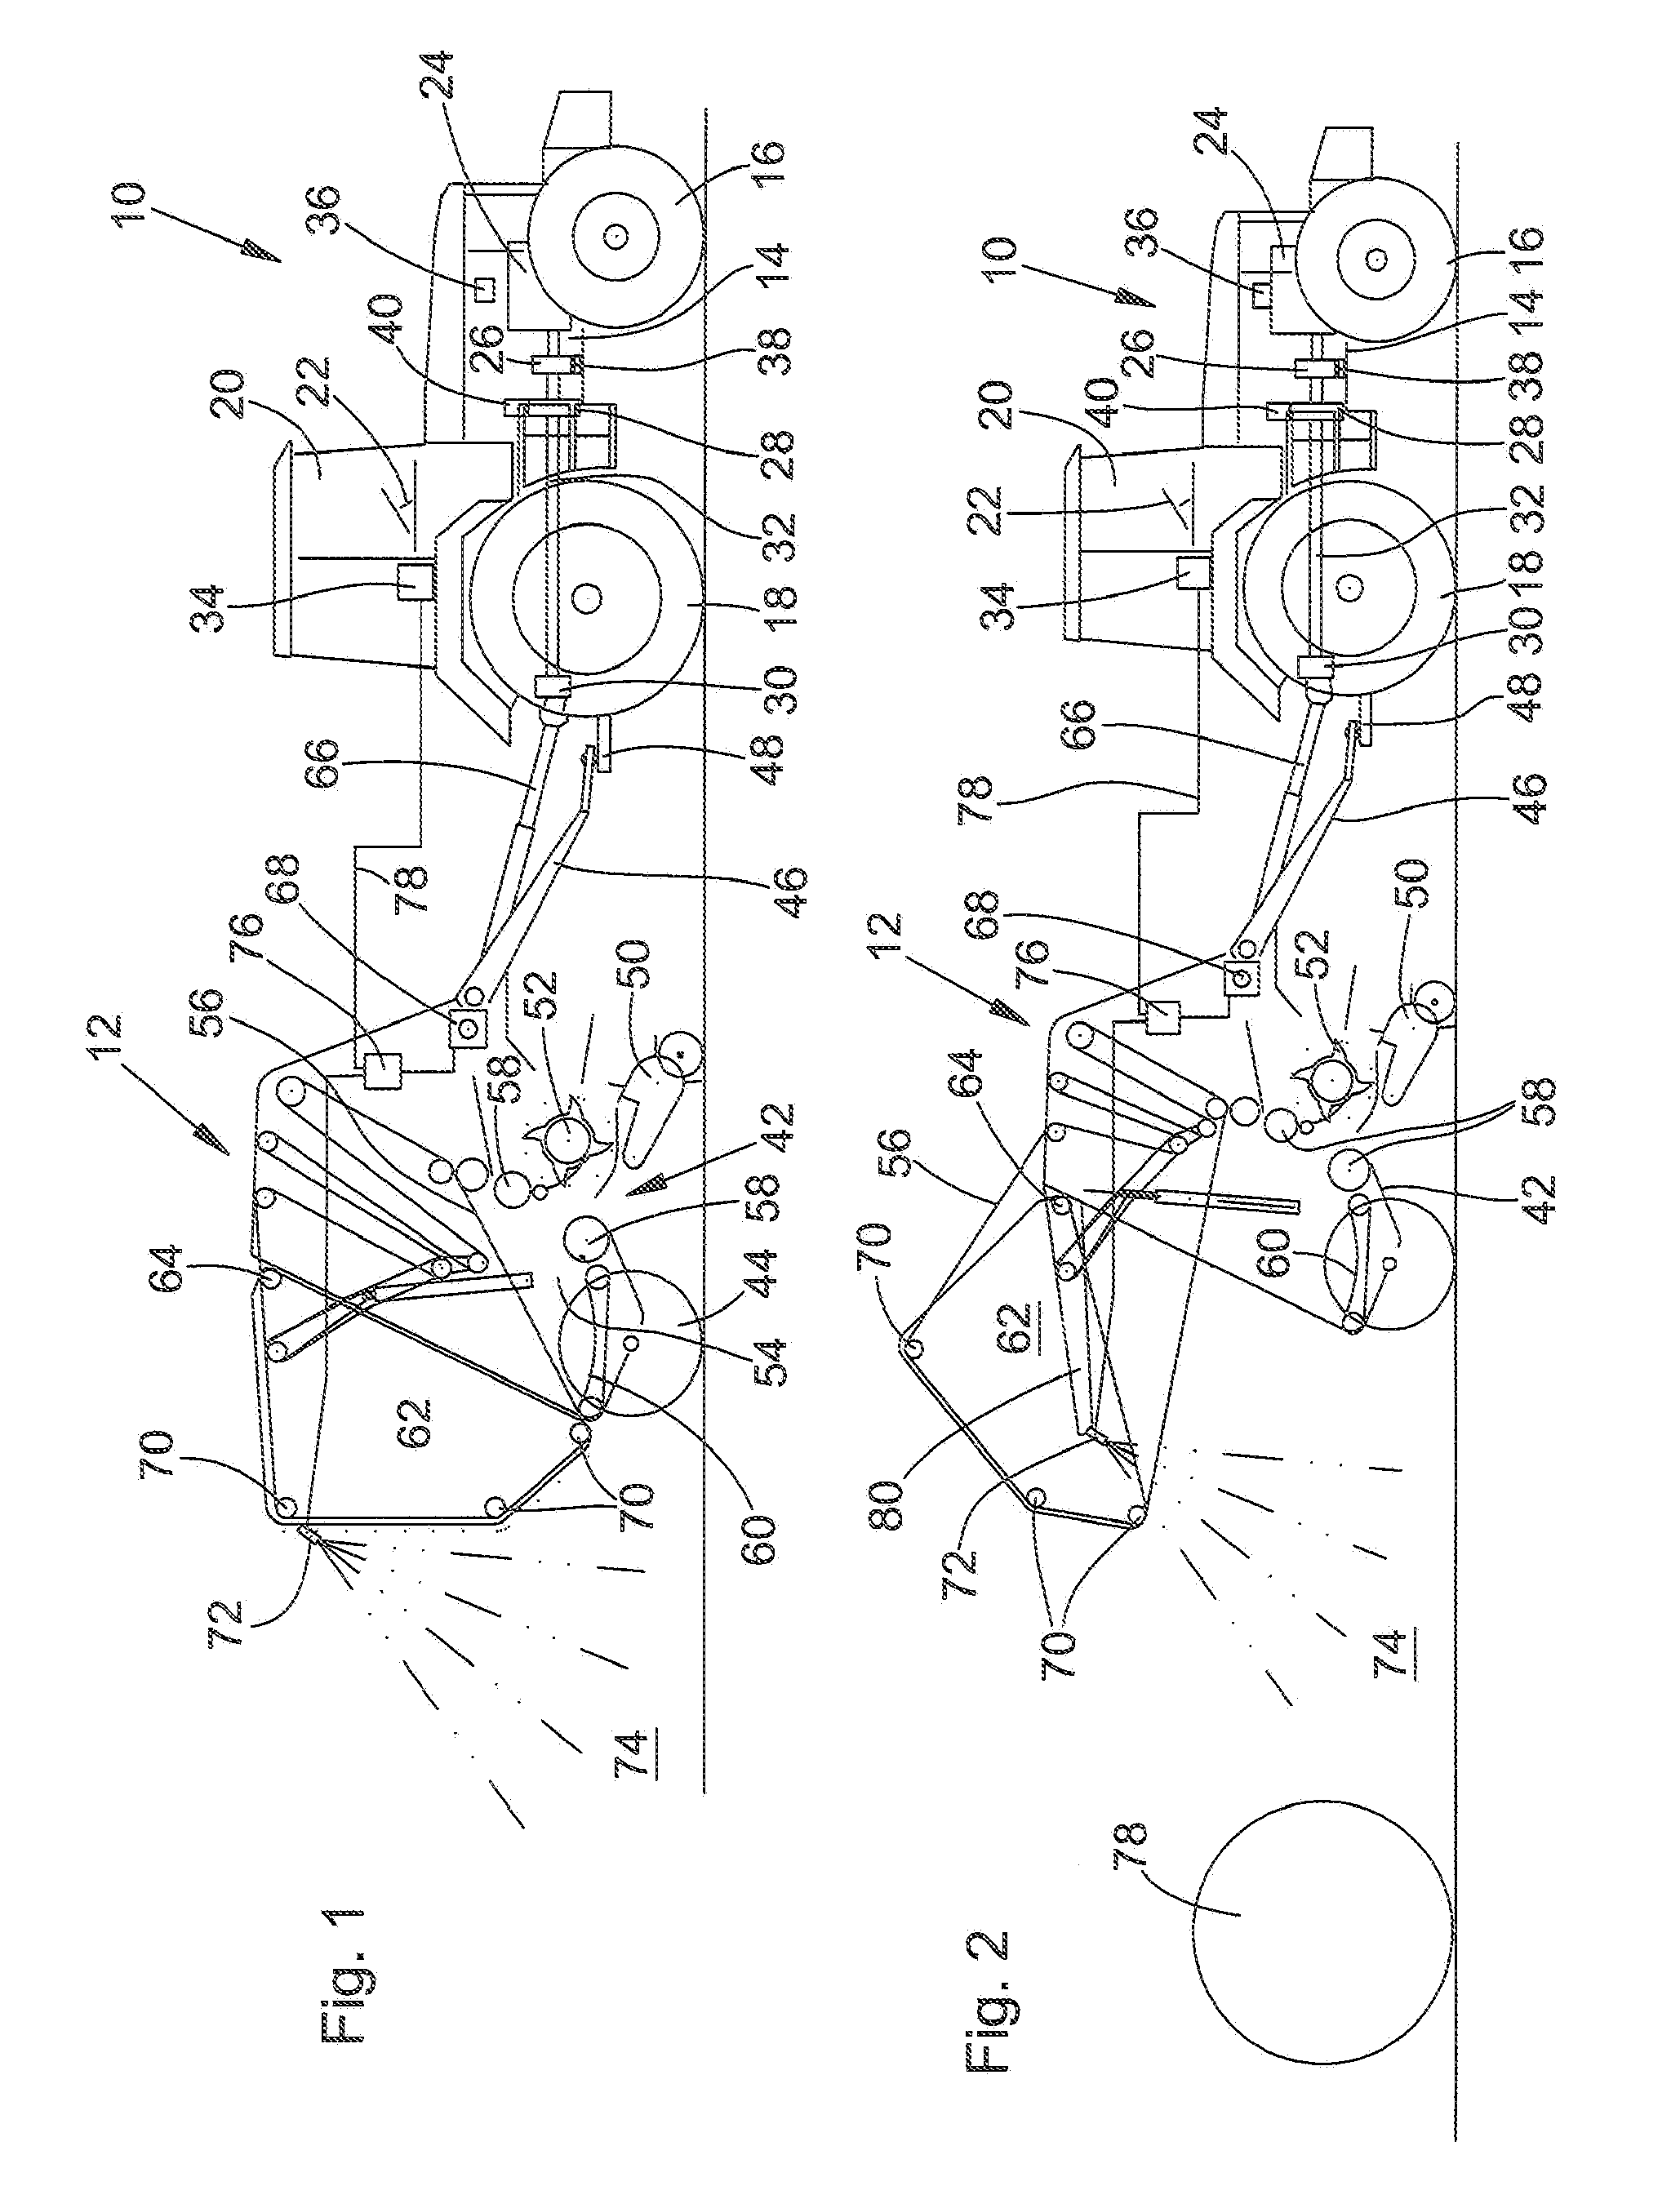 Combination Agricultural Apparatus And Towing Vehicle With A Safety Feature